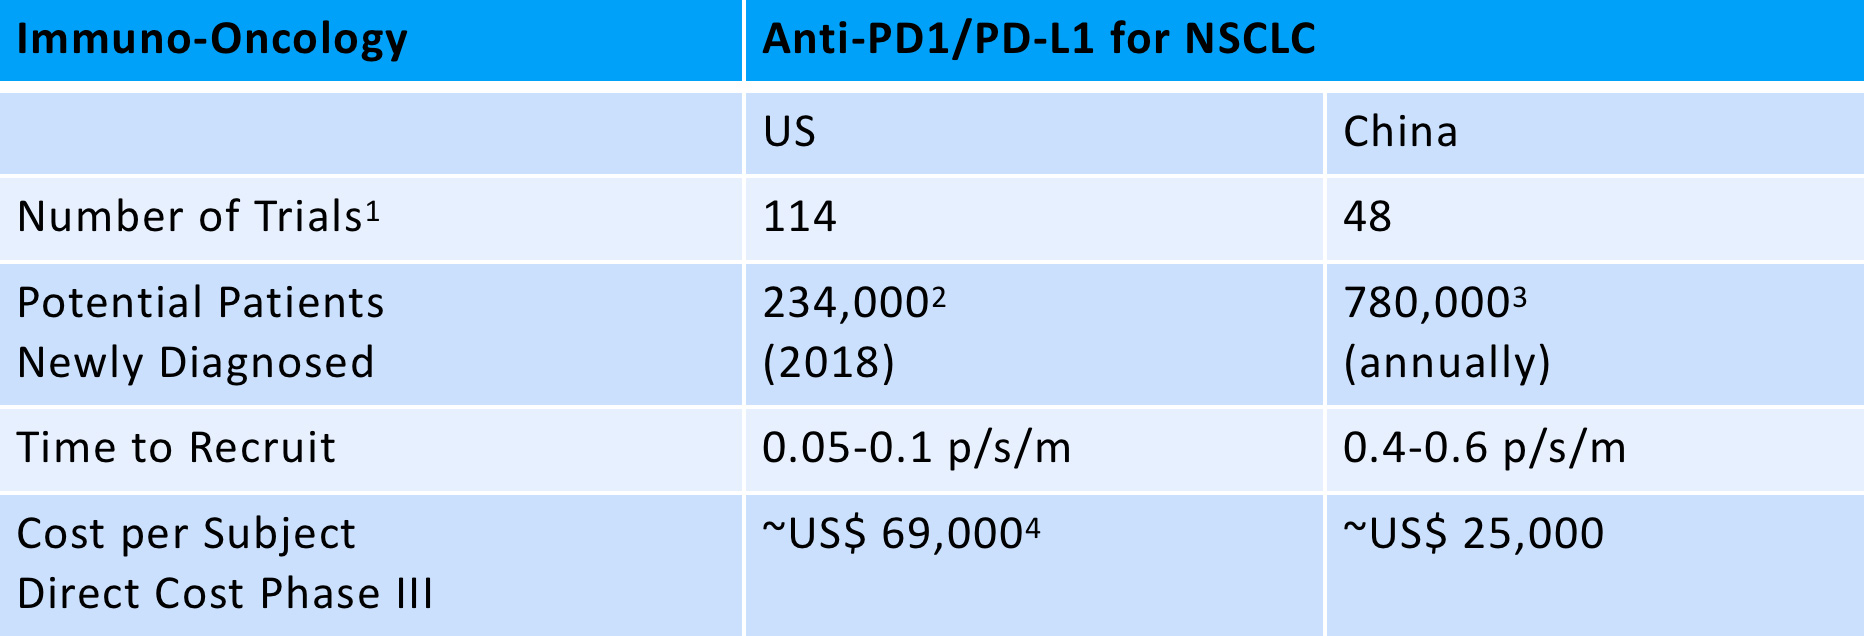 Comparison of non-small-cell lung carcinoma (NSCLC) trials in US versus China